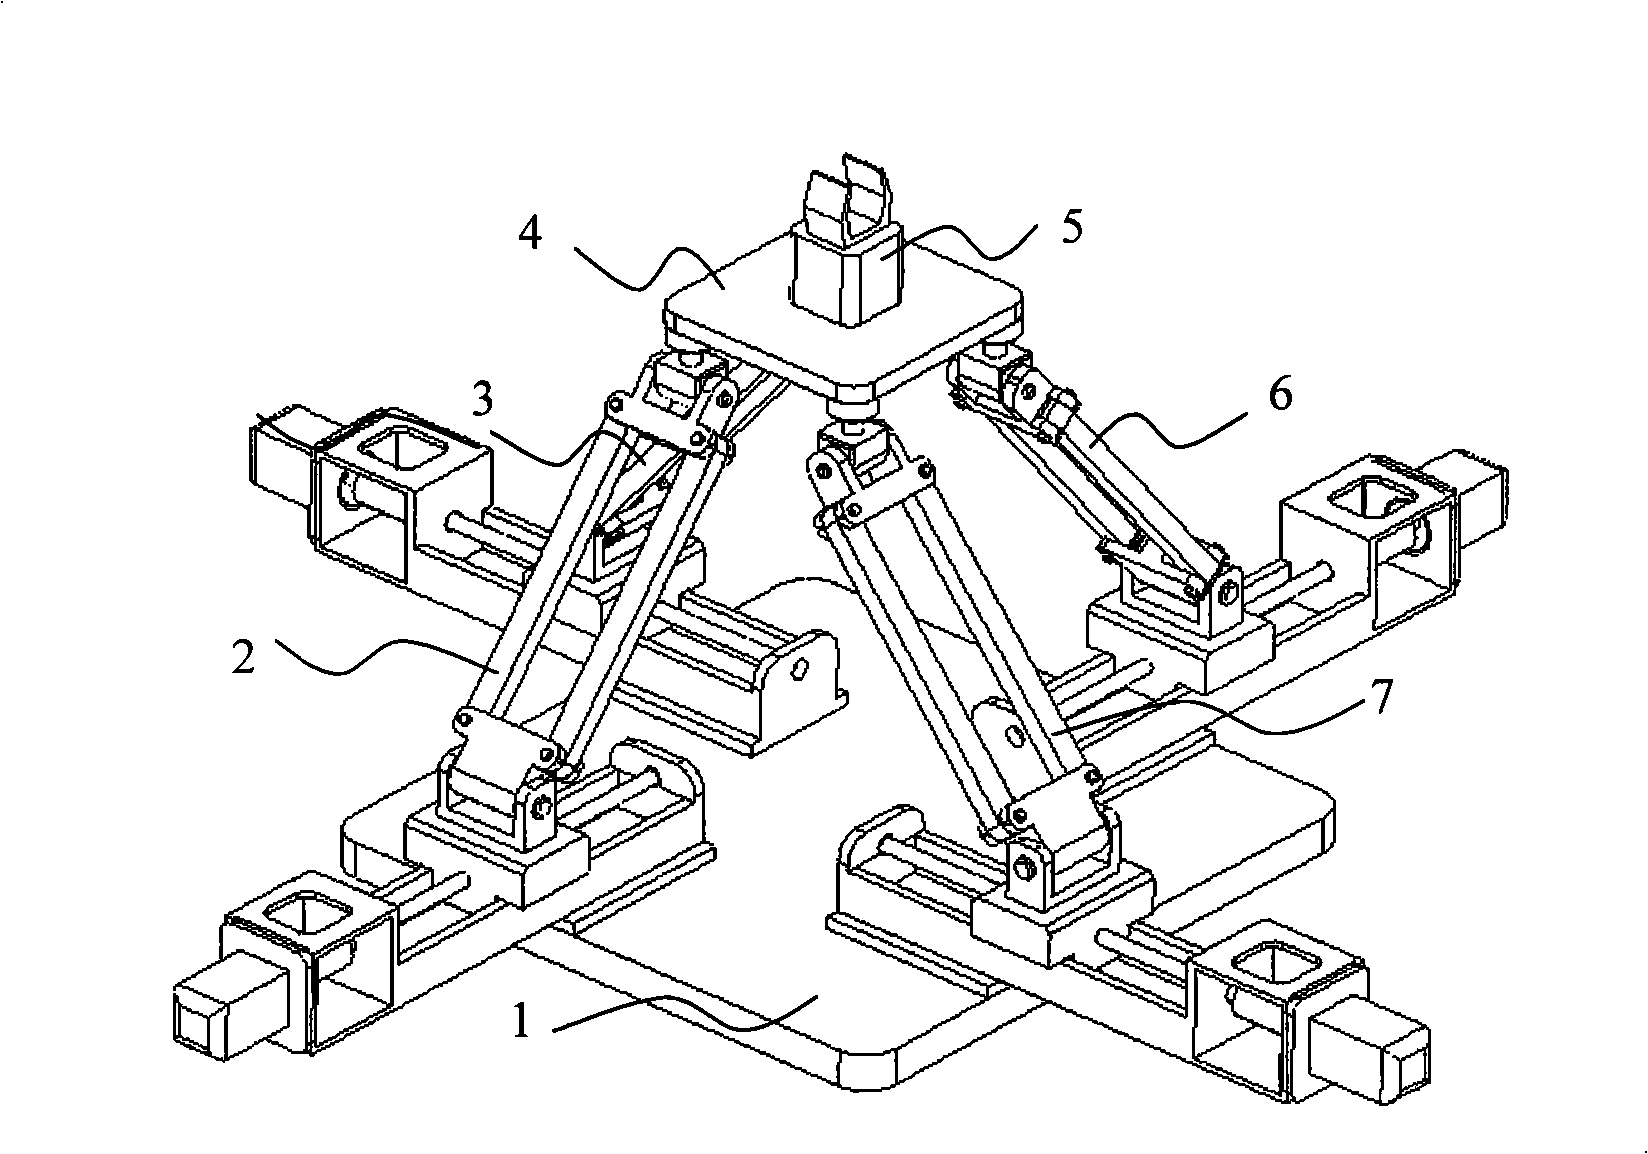 Four-freedom degree industrial robot